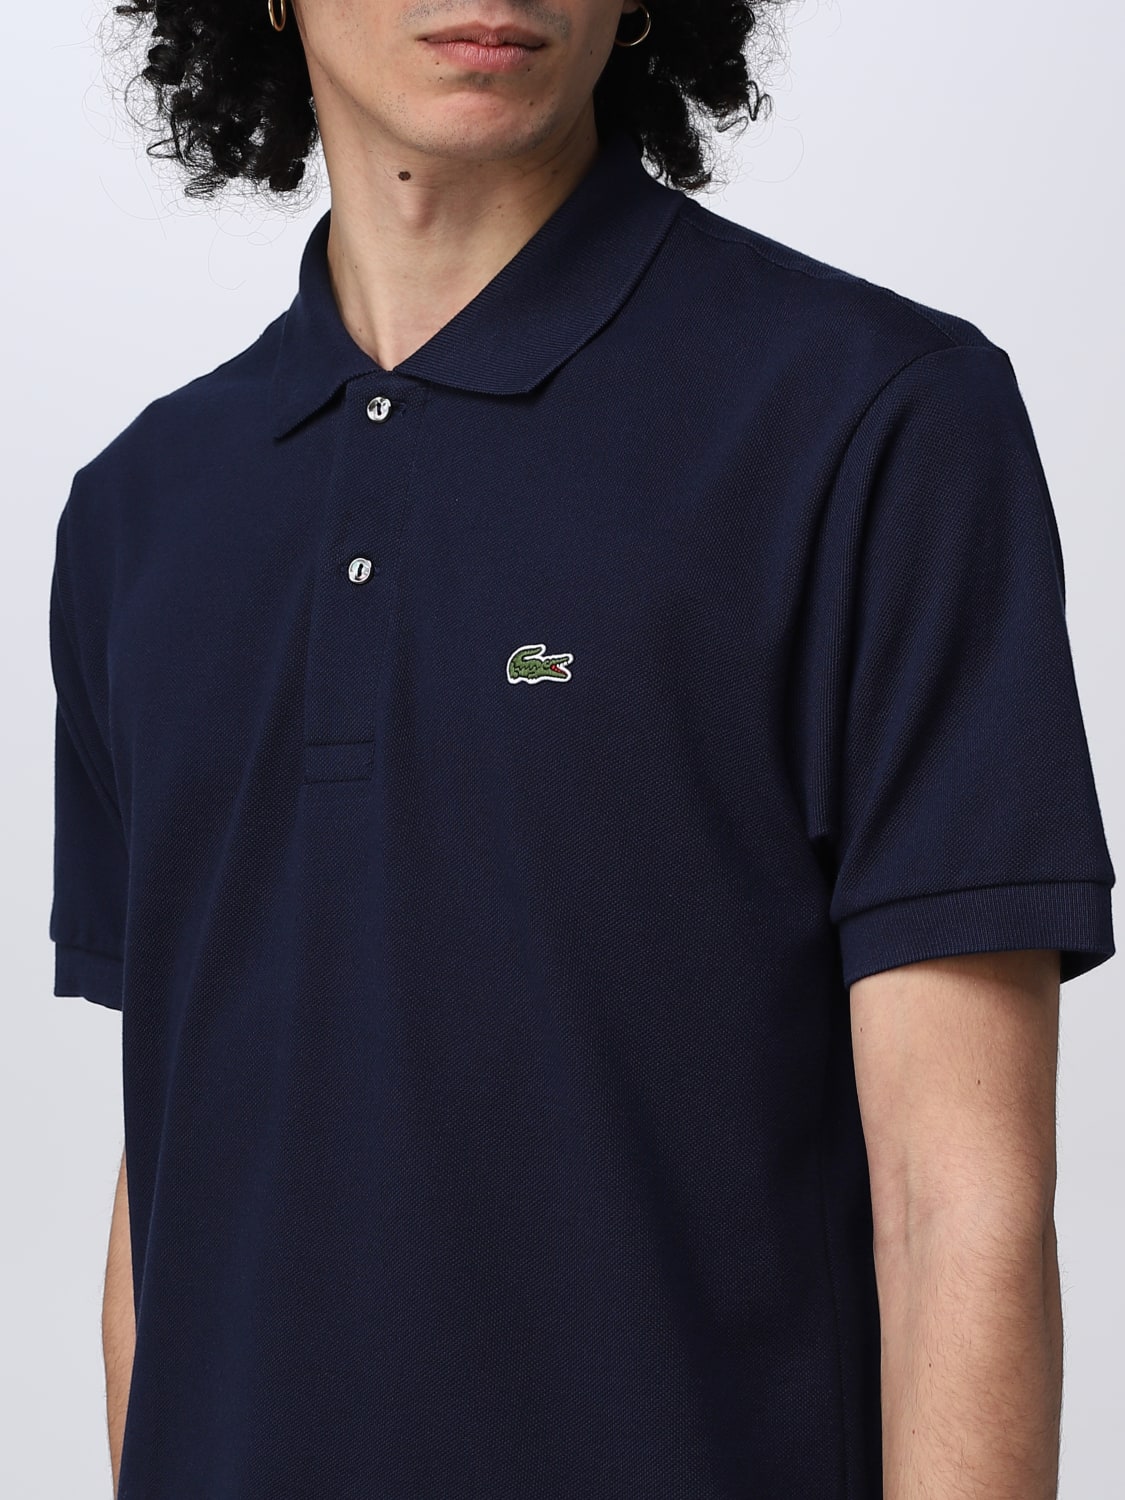 polo man Lacoste - polo for | Lacoste Outlet: shirt Navy shirt L1212 at online